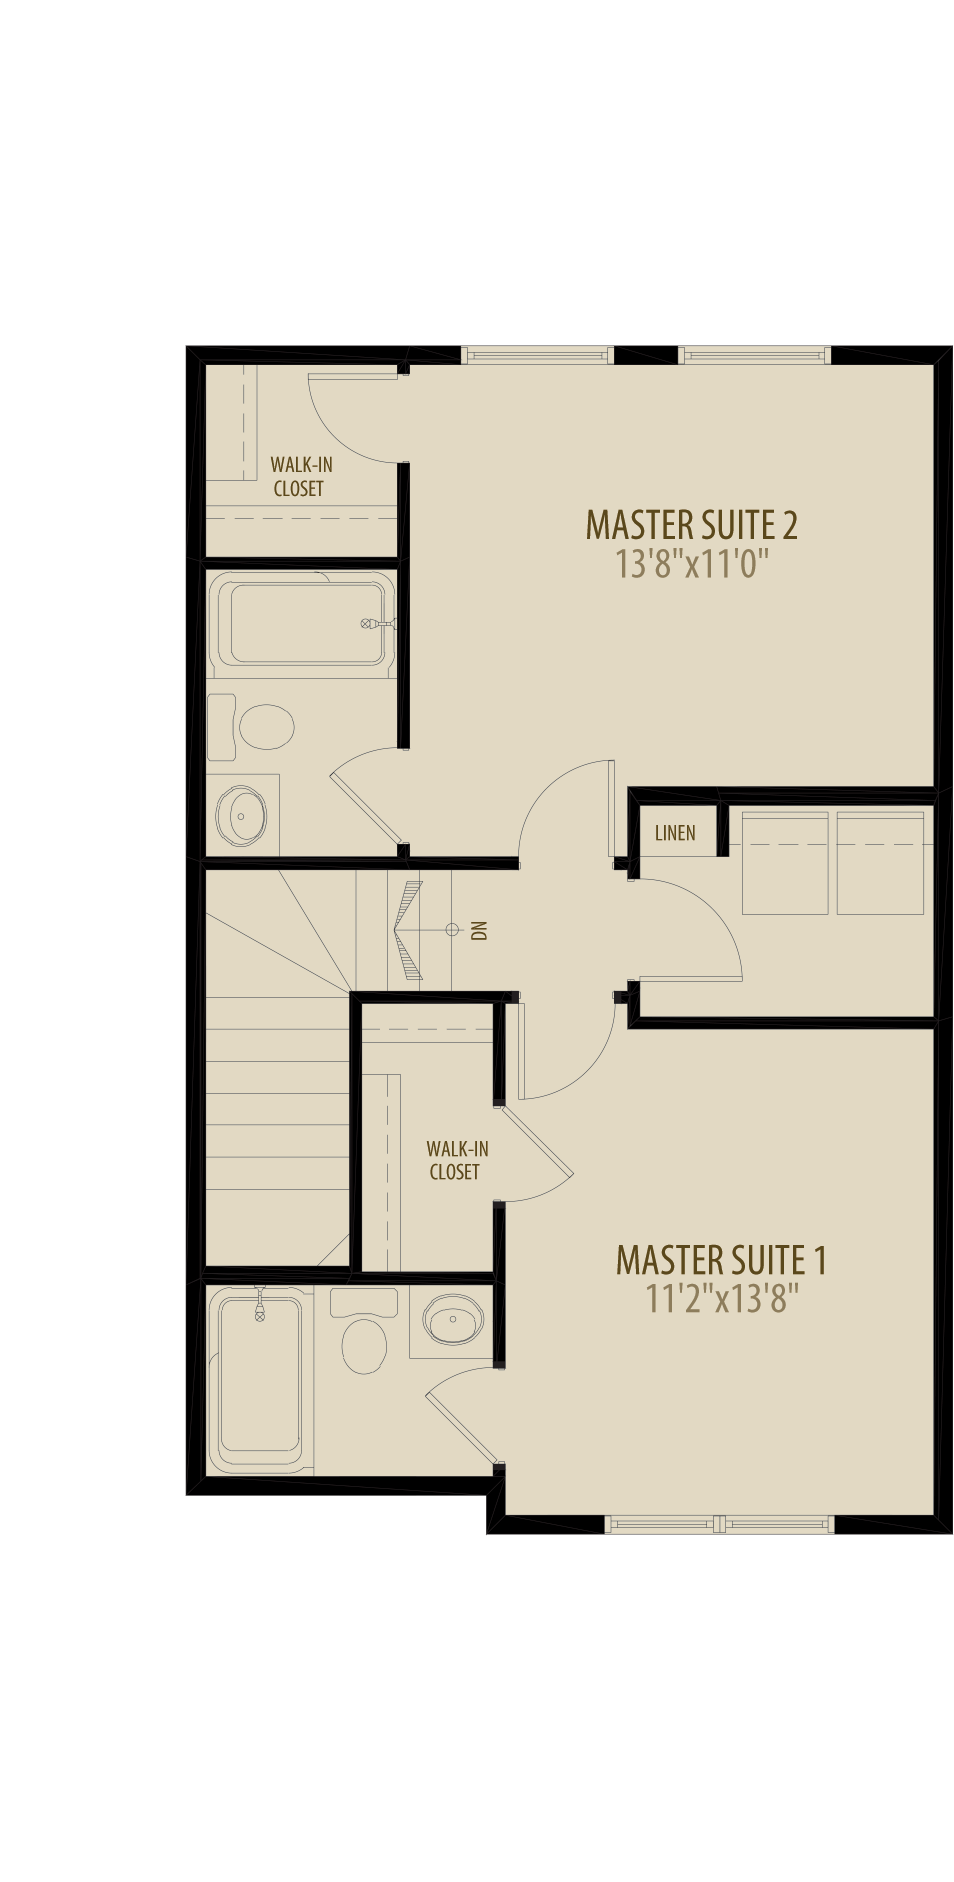 Dual Master Suites With Laundry Adds 20Sq Ft